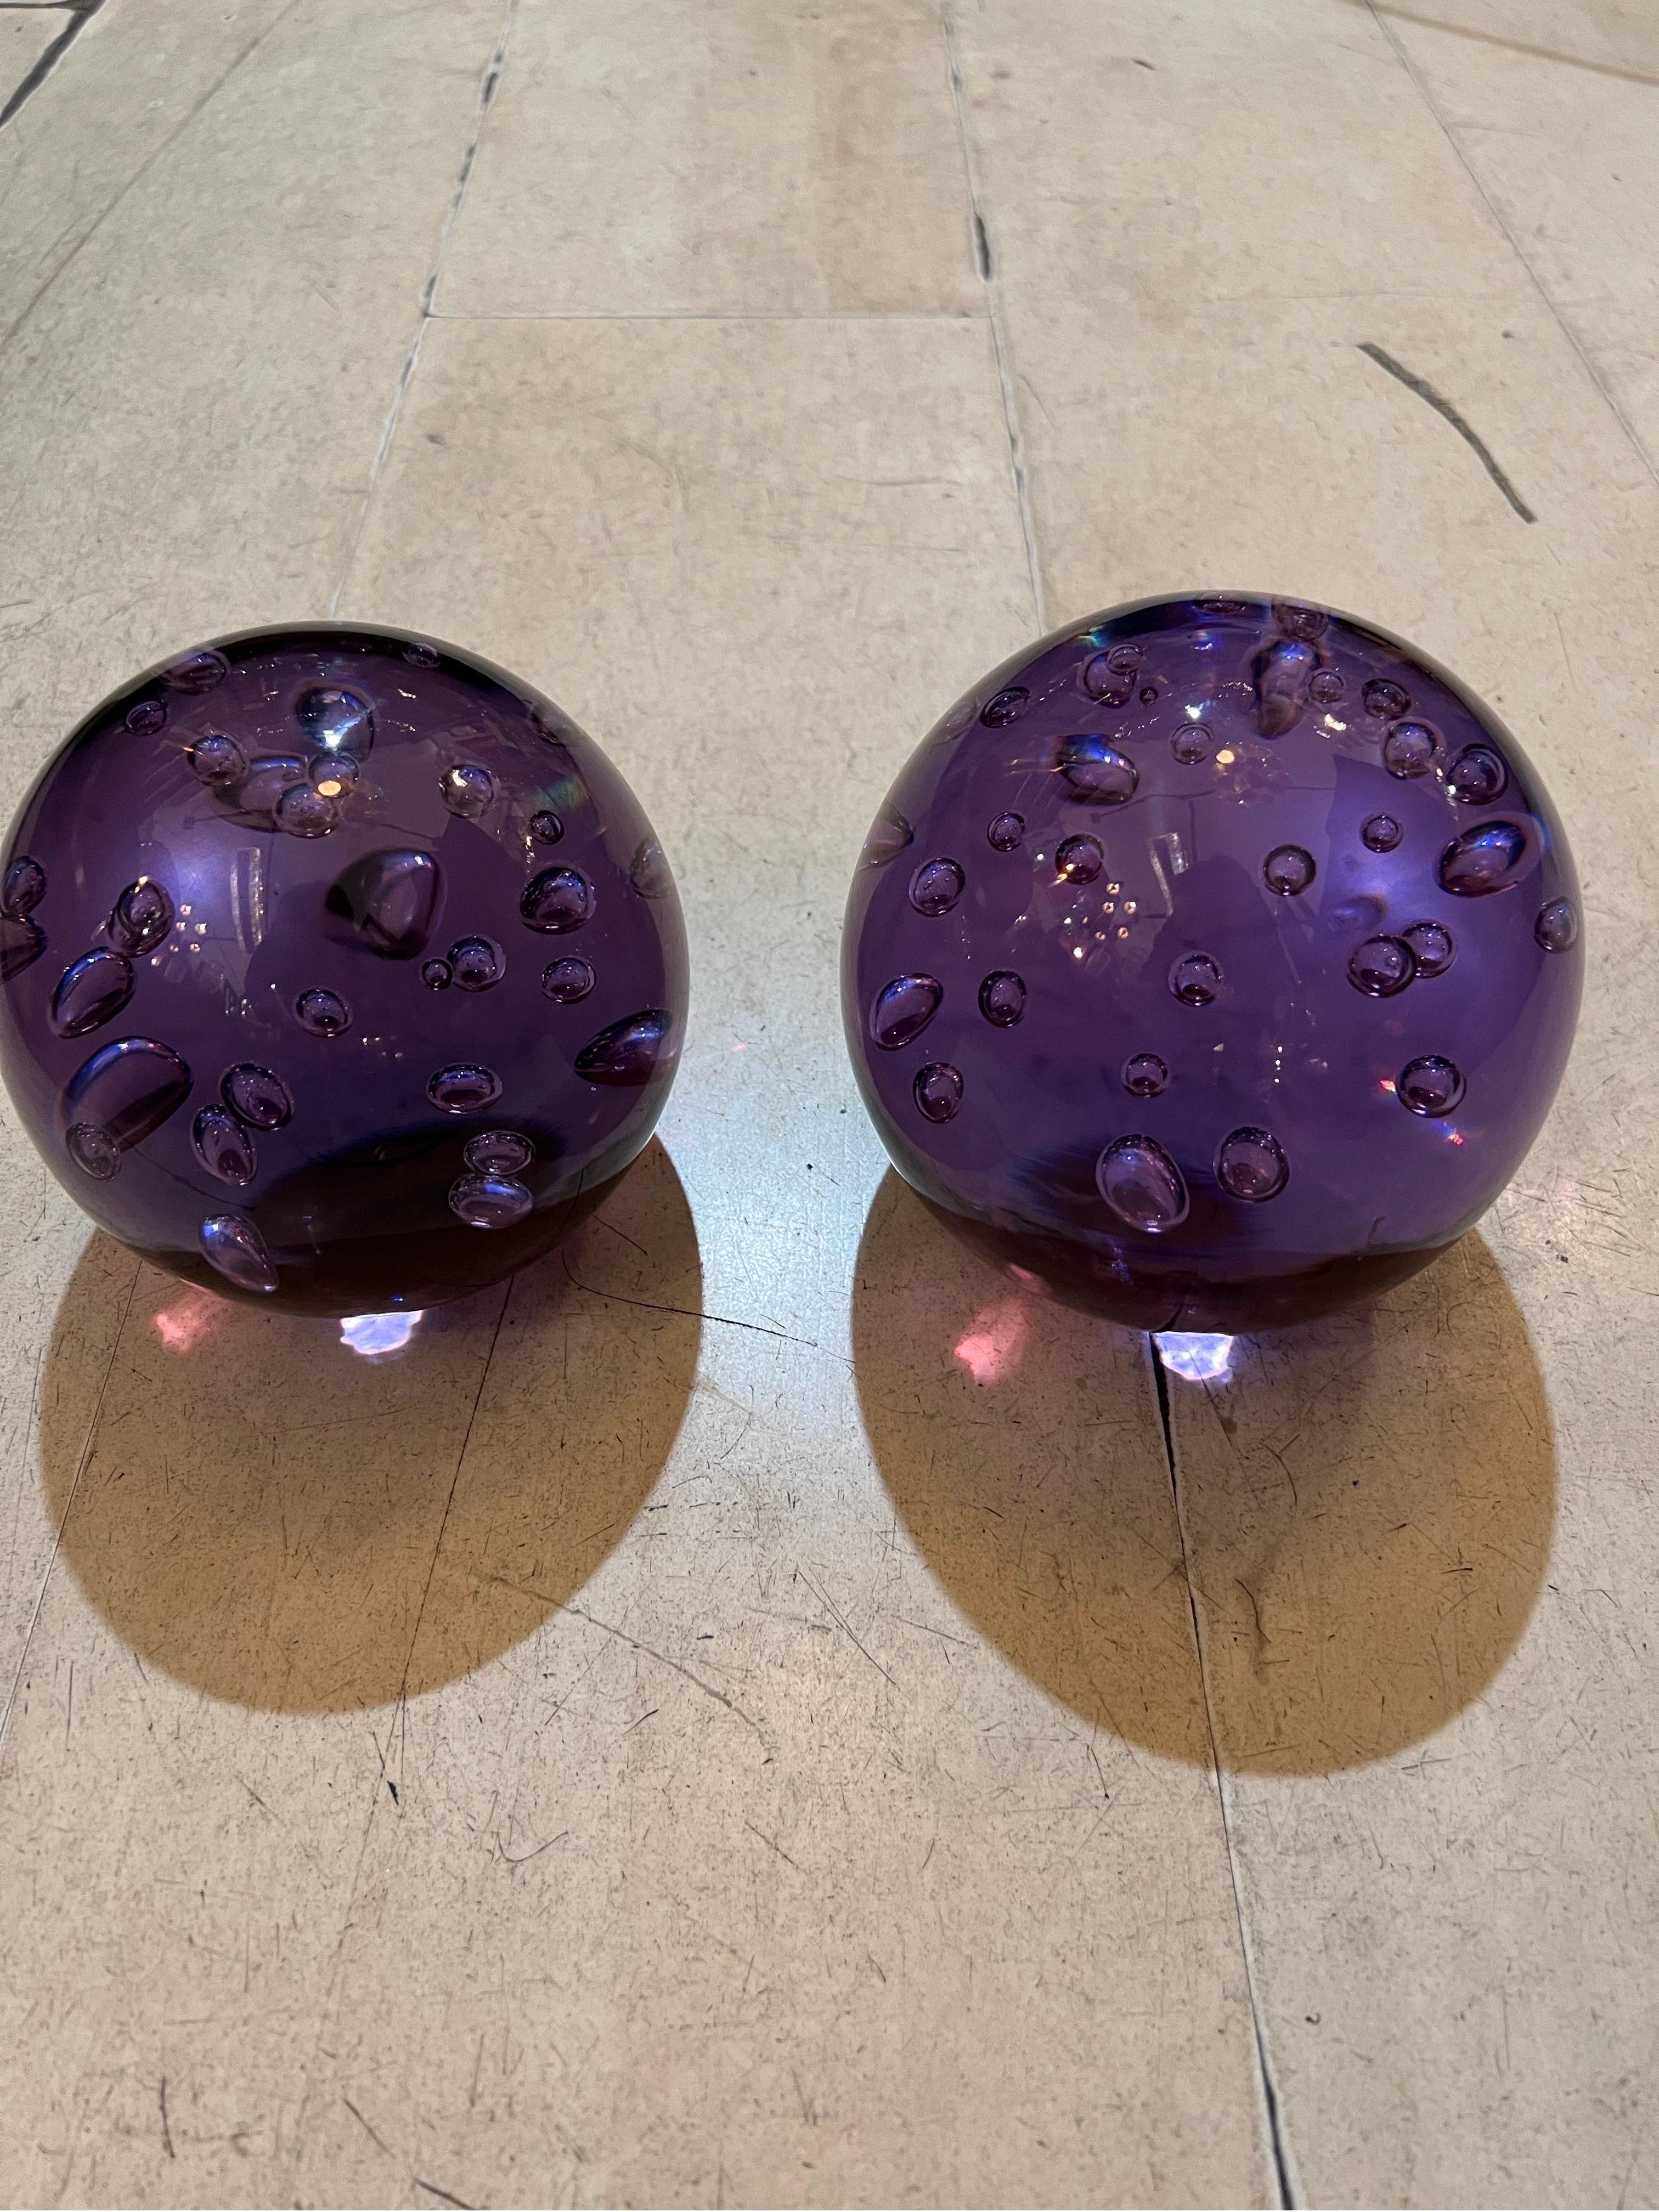 Pair of Purple Murano Glass Paperweights with air bubble included.
The glass sculture is solid and heavy, the air bubbles have been handblown, one sphere is slightly smaller than the other. Can be sold separately.